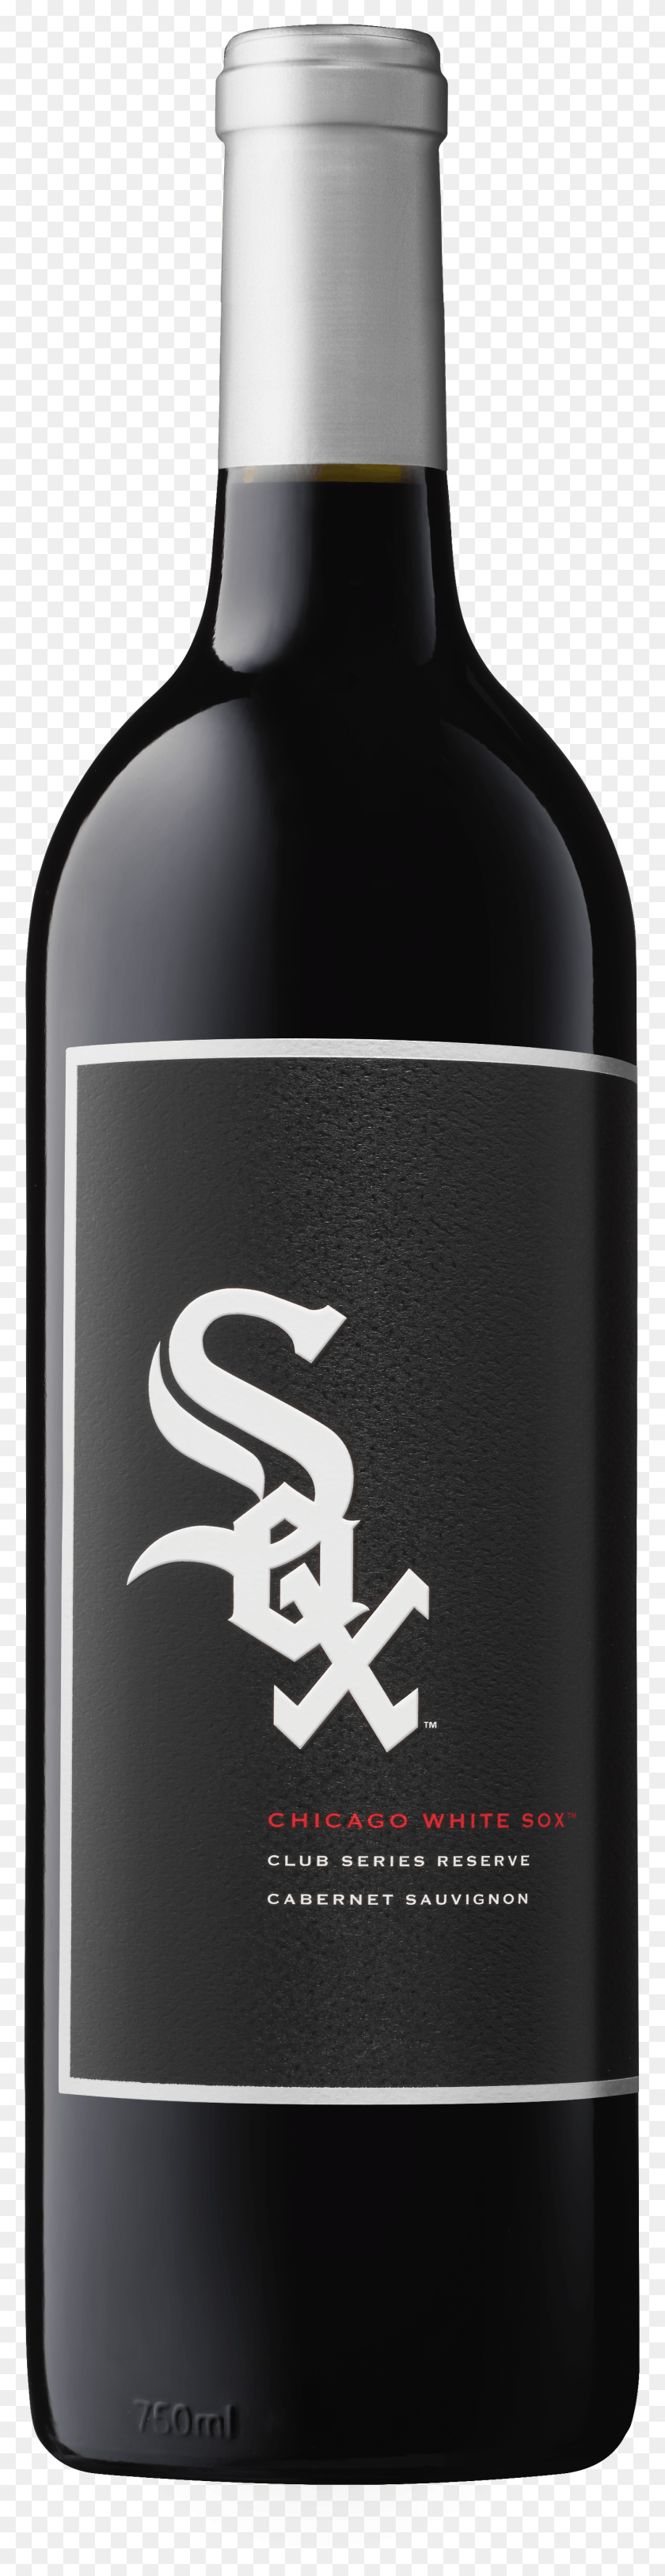 1326x5433 Chicago White Sox Club Series 2015 California Cabernet Chicago White Sox Png